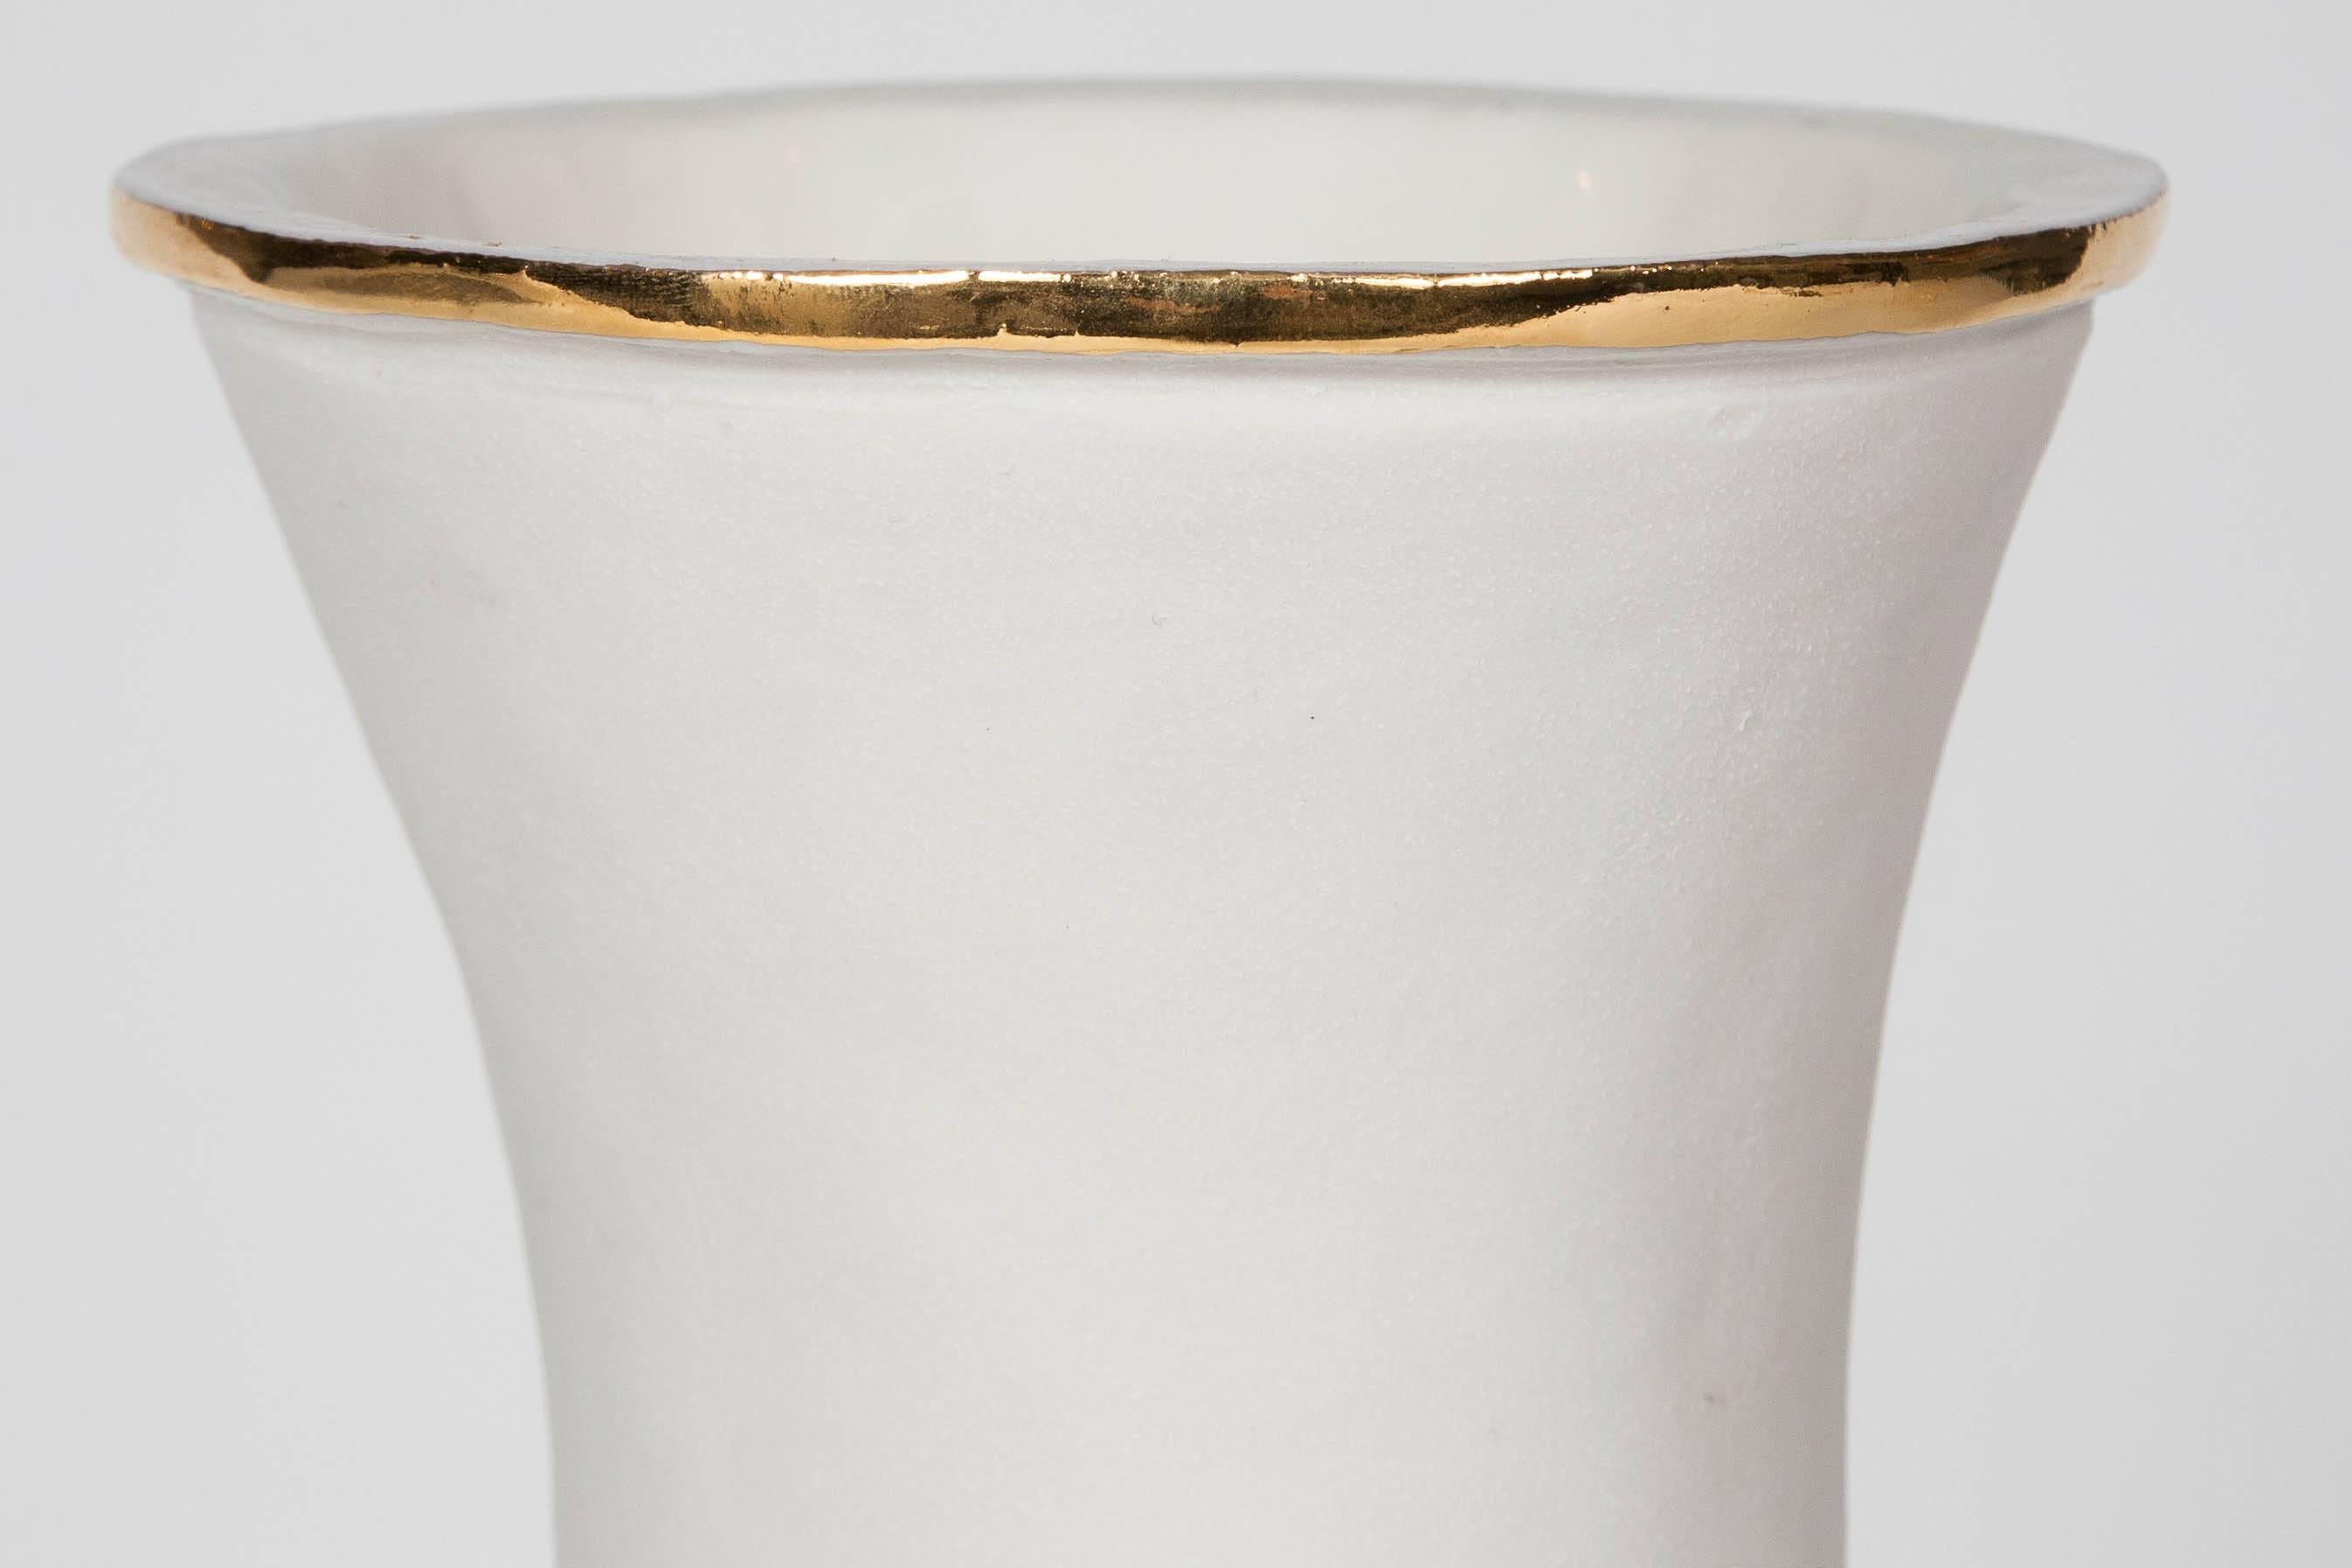 Hand coiled porcelain with parian flowers and gold lustre detail.

Working as ceramic artist, Hughes specialises in hand building, enjoying working with form and texture and studying its relation to decoration. Her practice is both fuelled by and